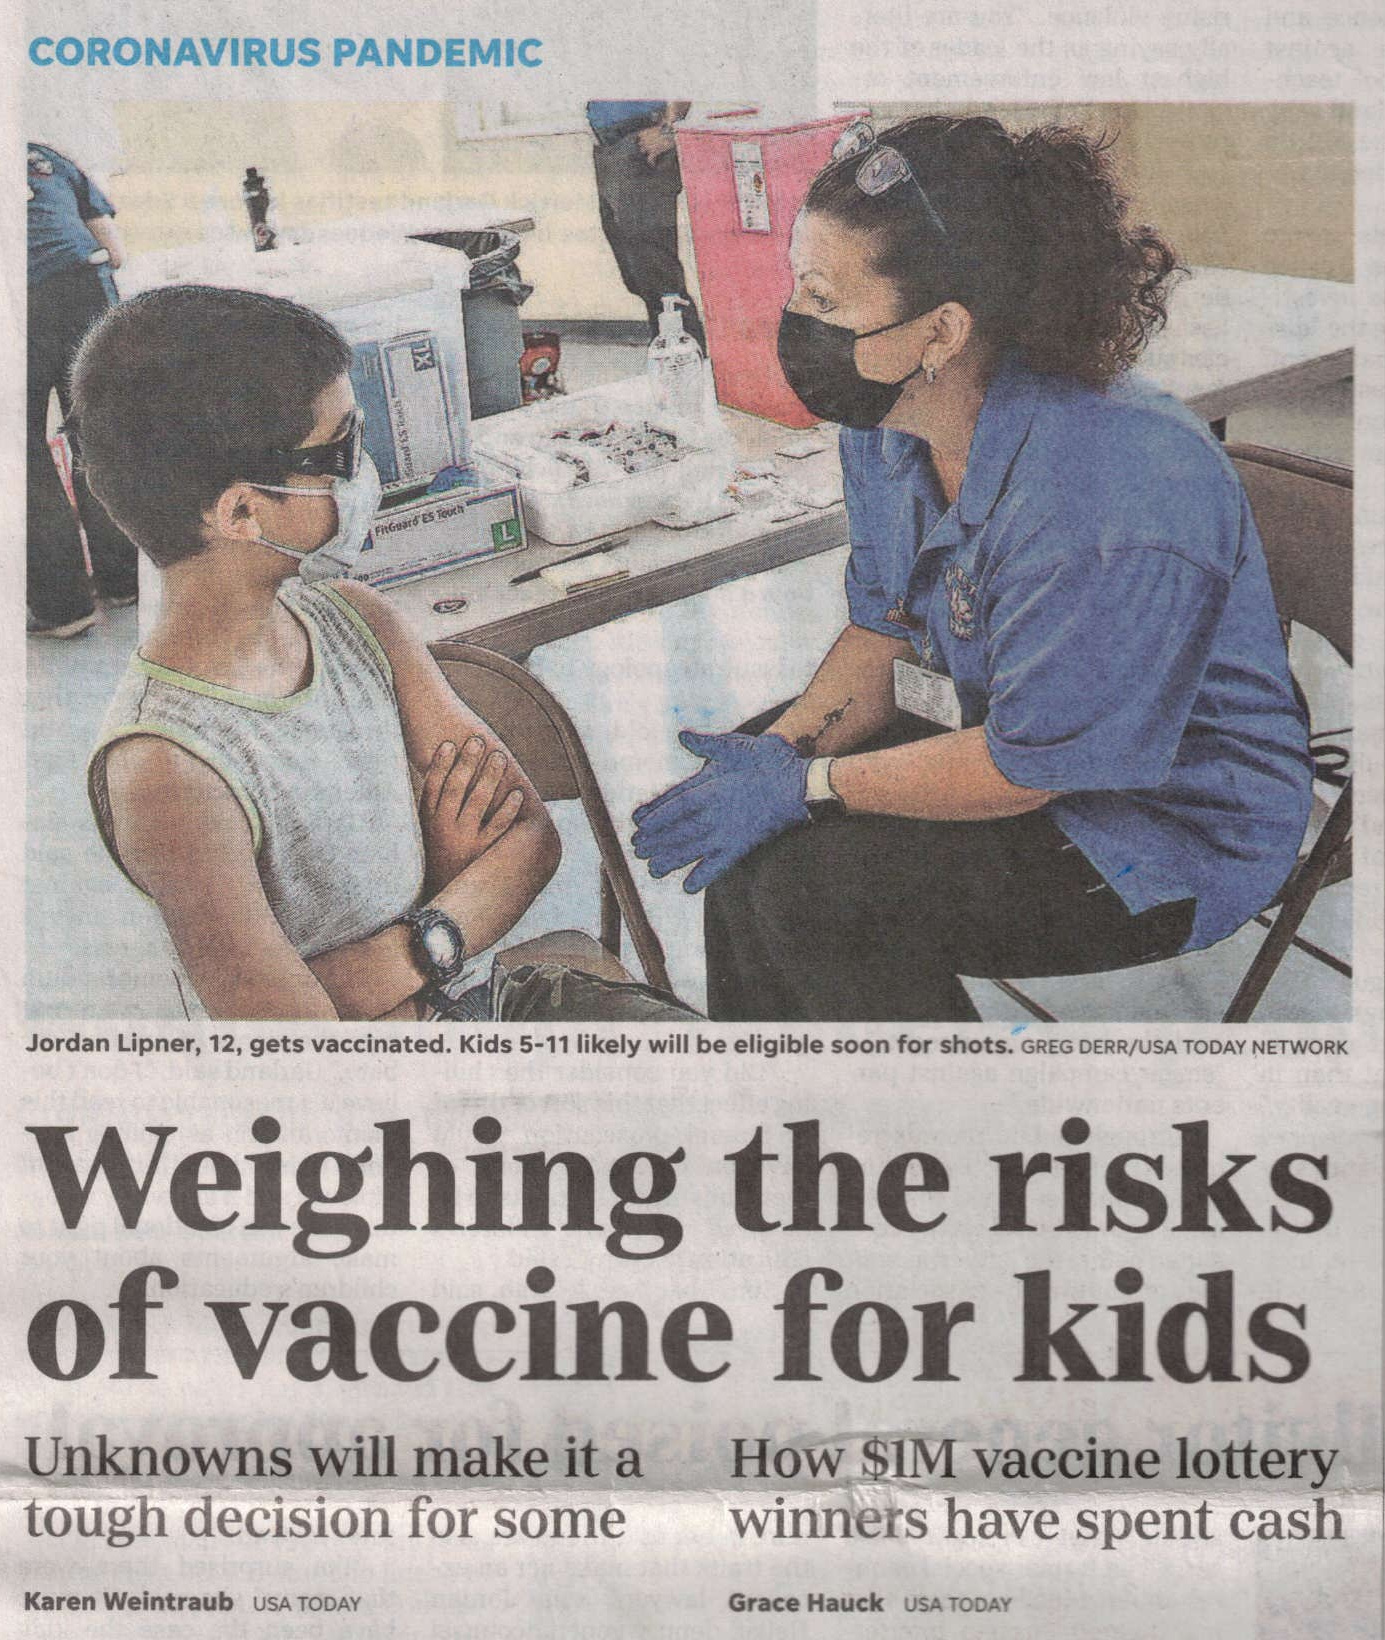 USA Today: Weighing the Risks of Vaccine for Kids